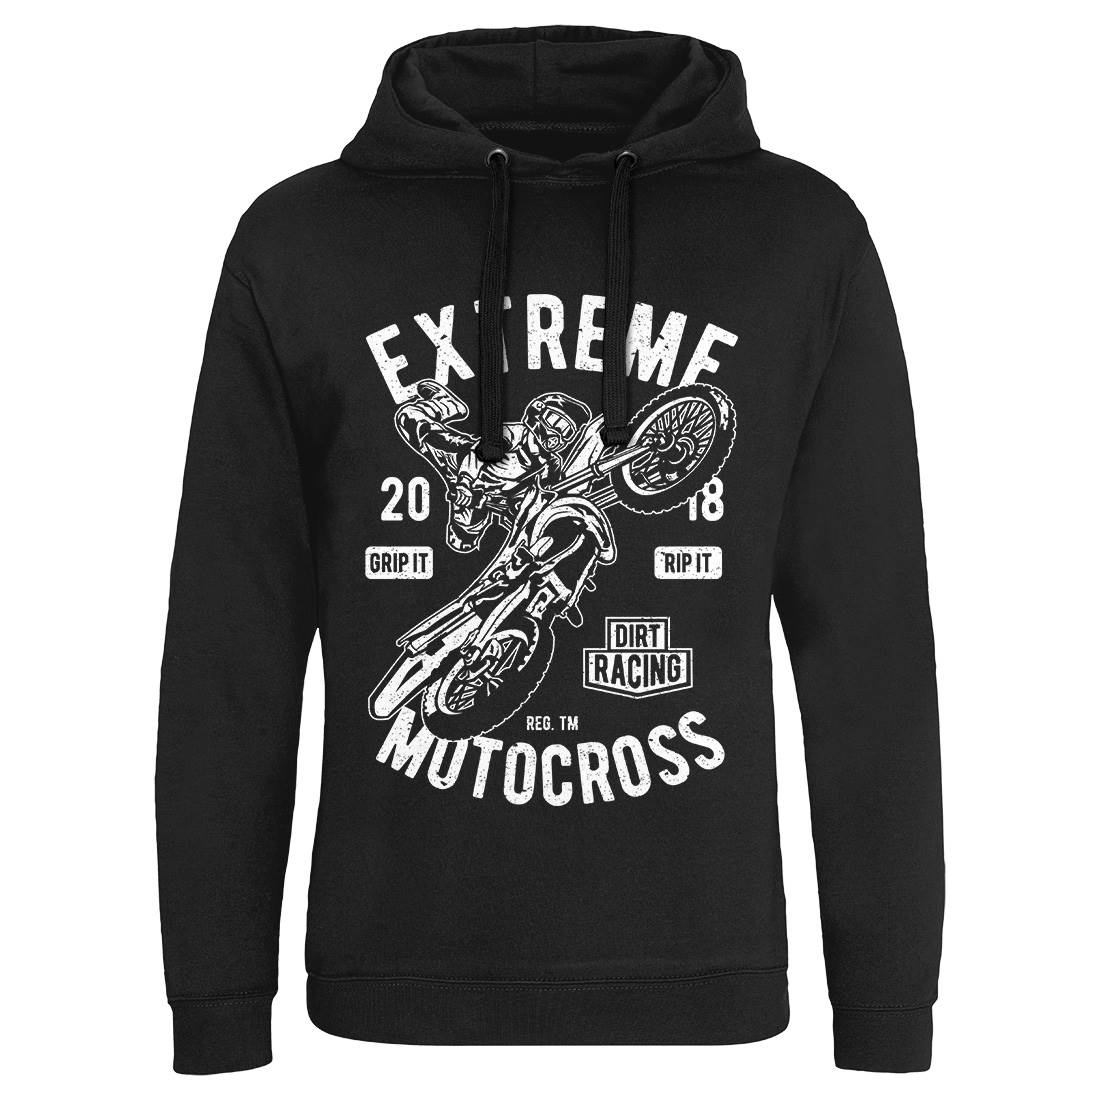 Extreme Motocross Mens Hoodie Without Pocket Motorcycles A651